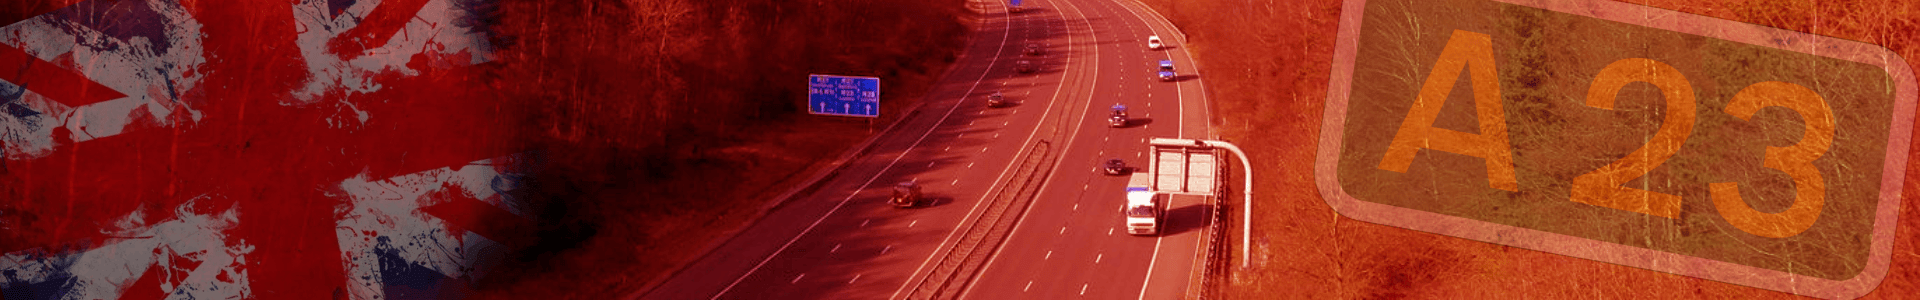 A 6 kilometre section of the A23 is the UK’s deadliest road with 4.45 fatal crashes per kilometre each year